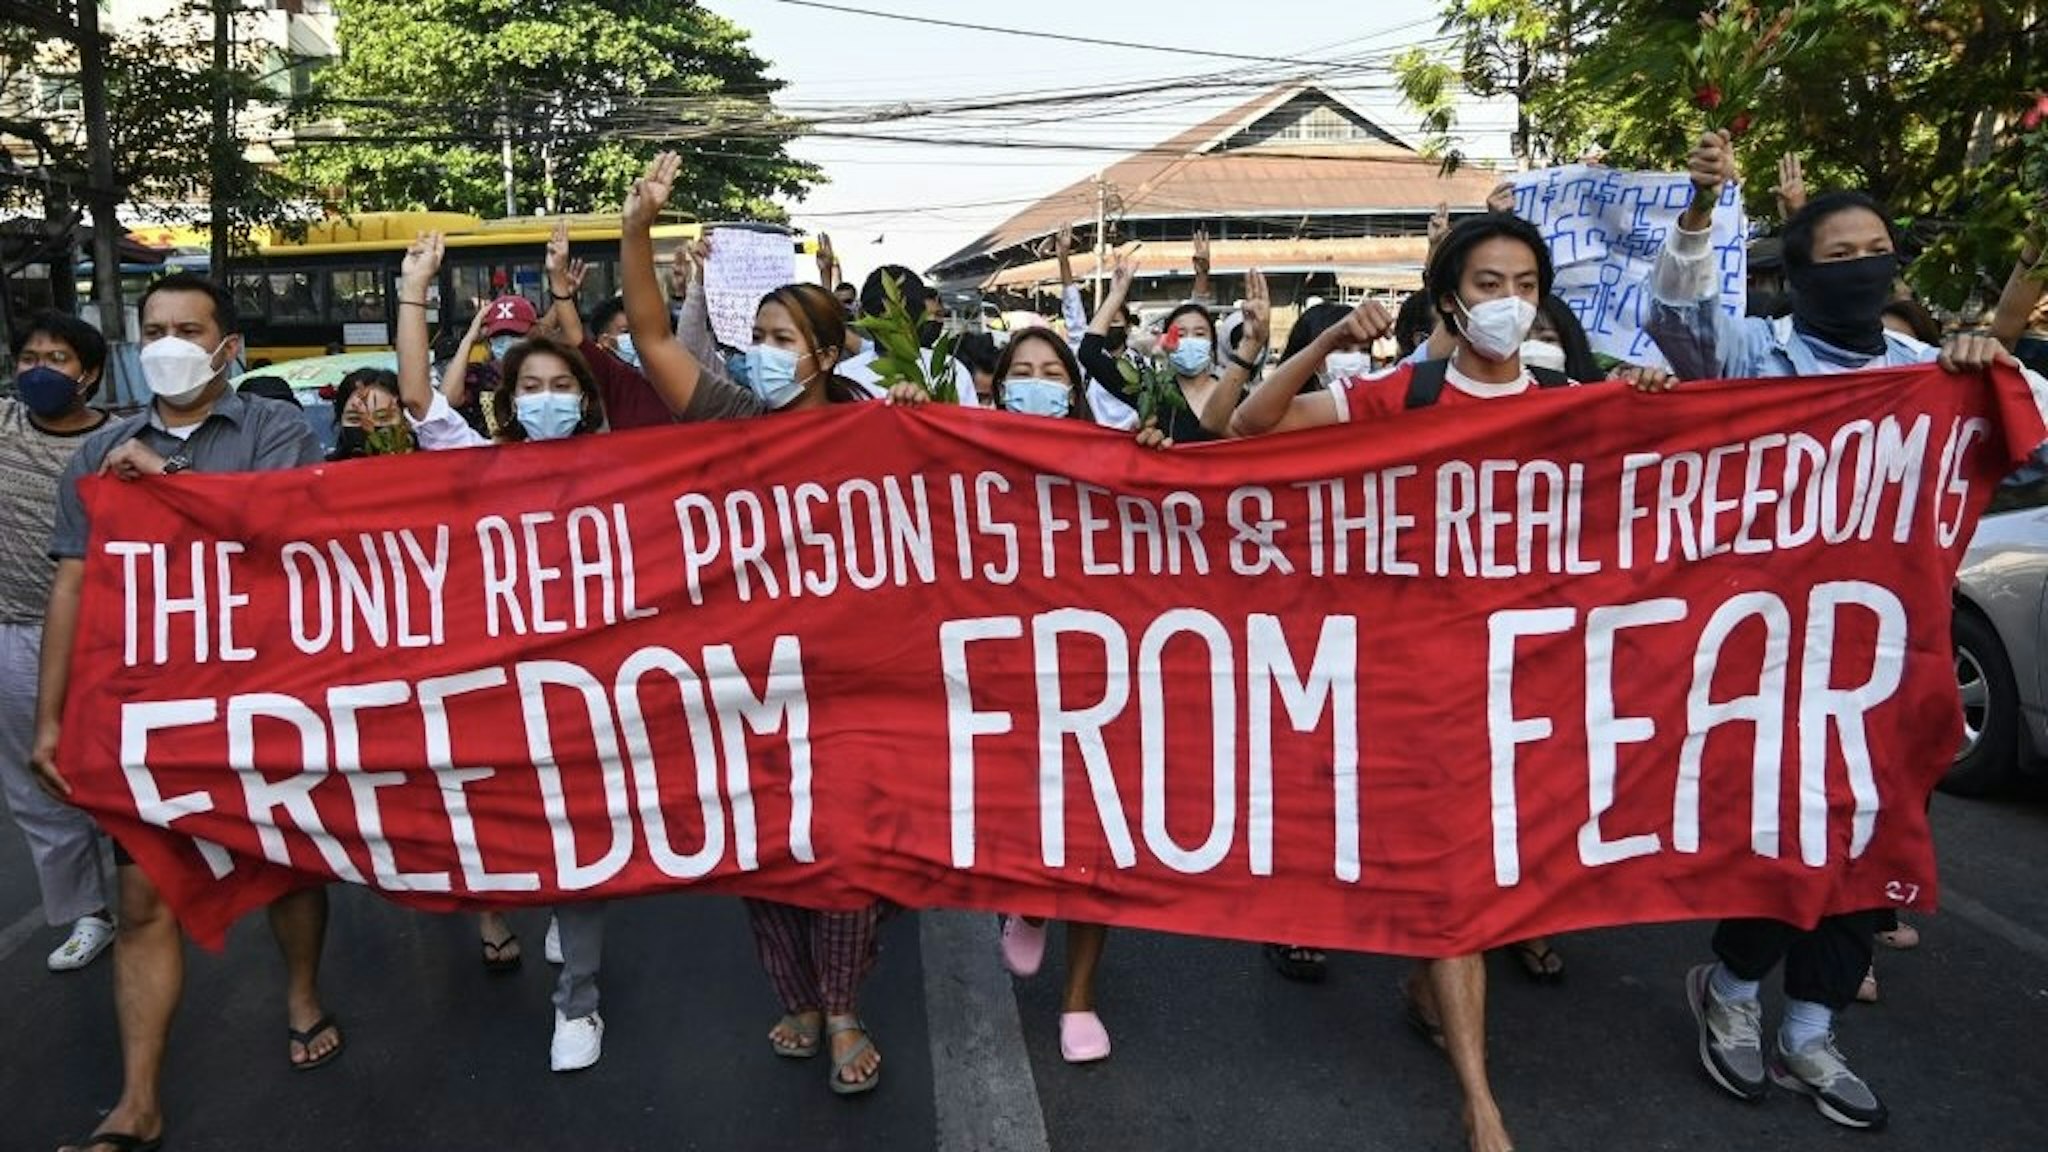 MYANMAR-POLITICS-MILITARY Protesters hold a banner as they take part in a demonstration against the military coup in Yangon December 5, 2021. (Photo by AFP) (Photo by STR/AFP via Getty Images) STR / Contributor